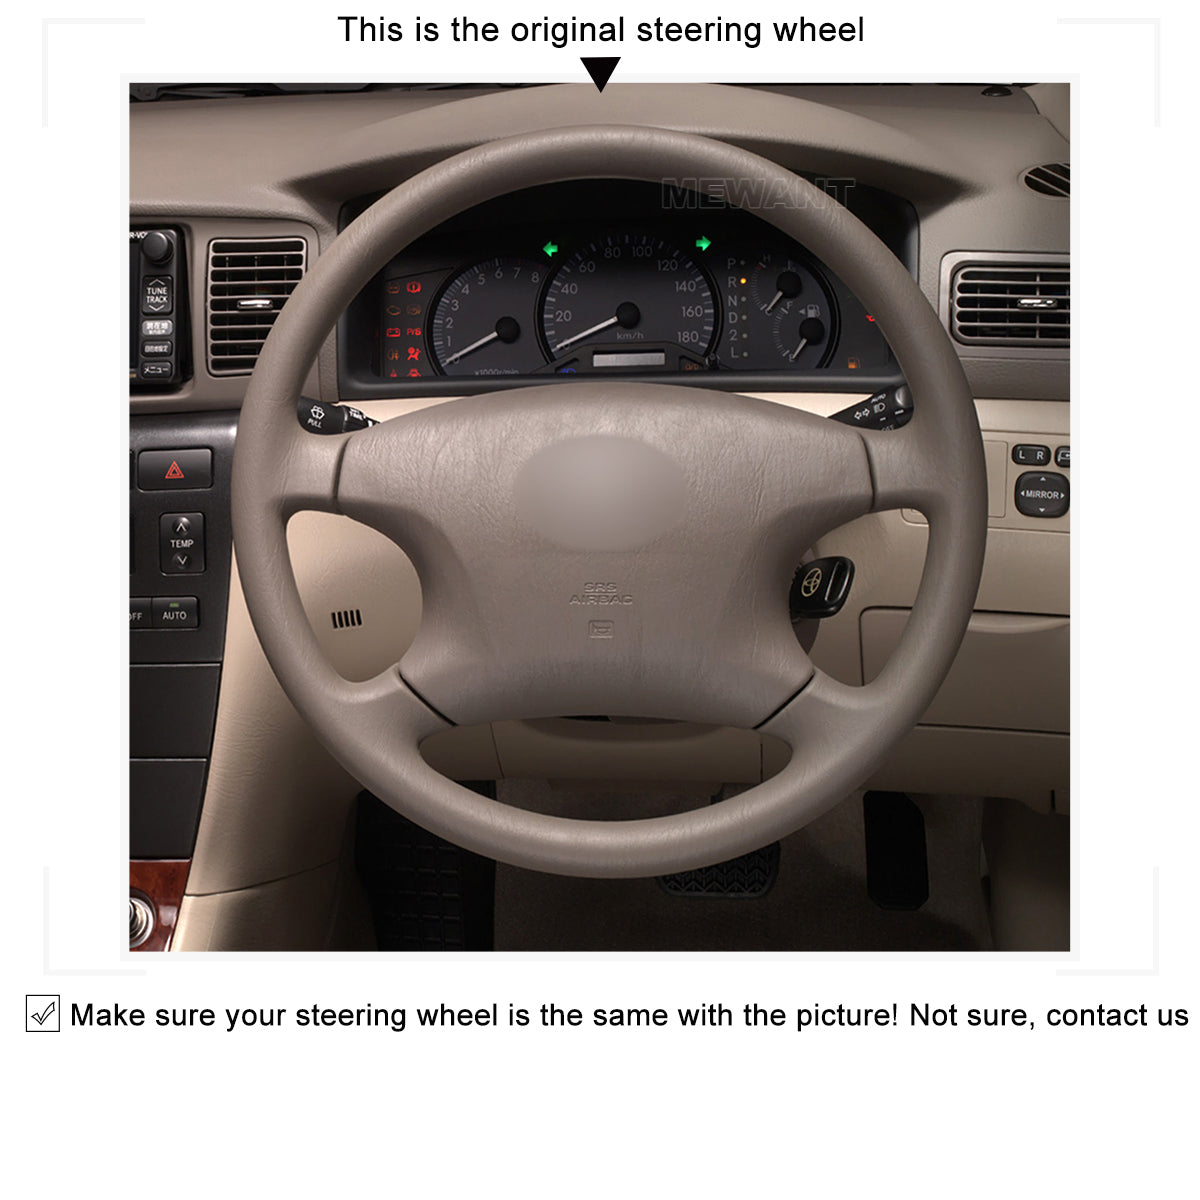 MEWANT Hand Stitching Black Suede Car Steering Wheel Cover for Toyota Corolla Camry Hilux Avensis Verso